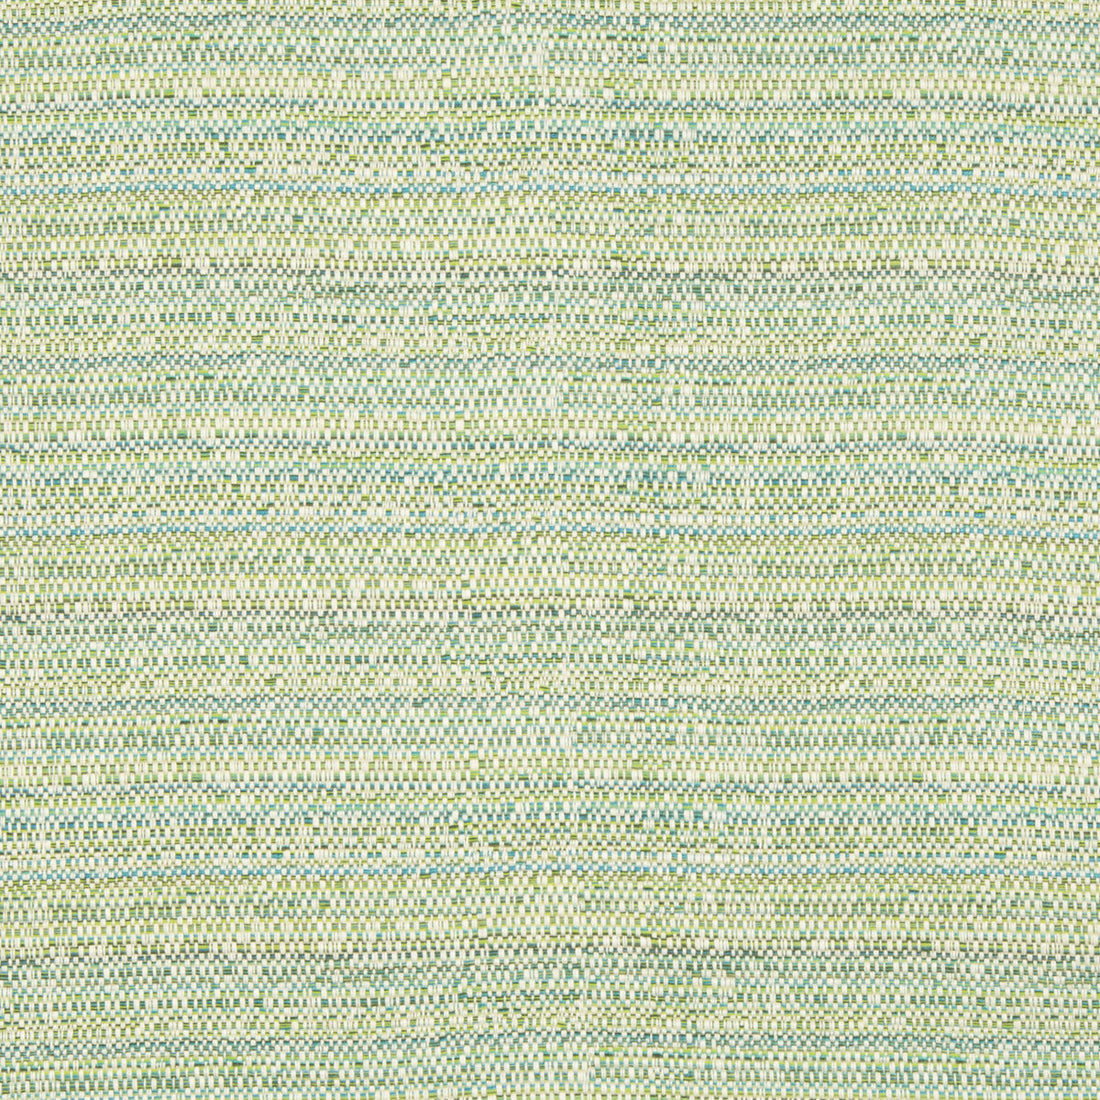 Kravet Couture fabric in 34274-3 color - pattern 34274.3.0 - by Kravet Couture in the Sunbrella collection